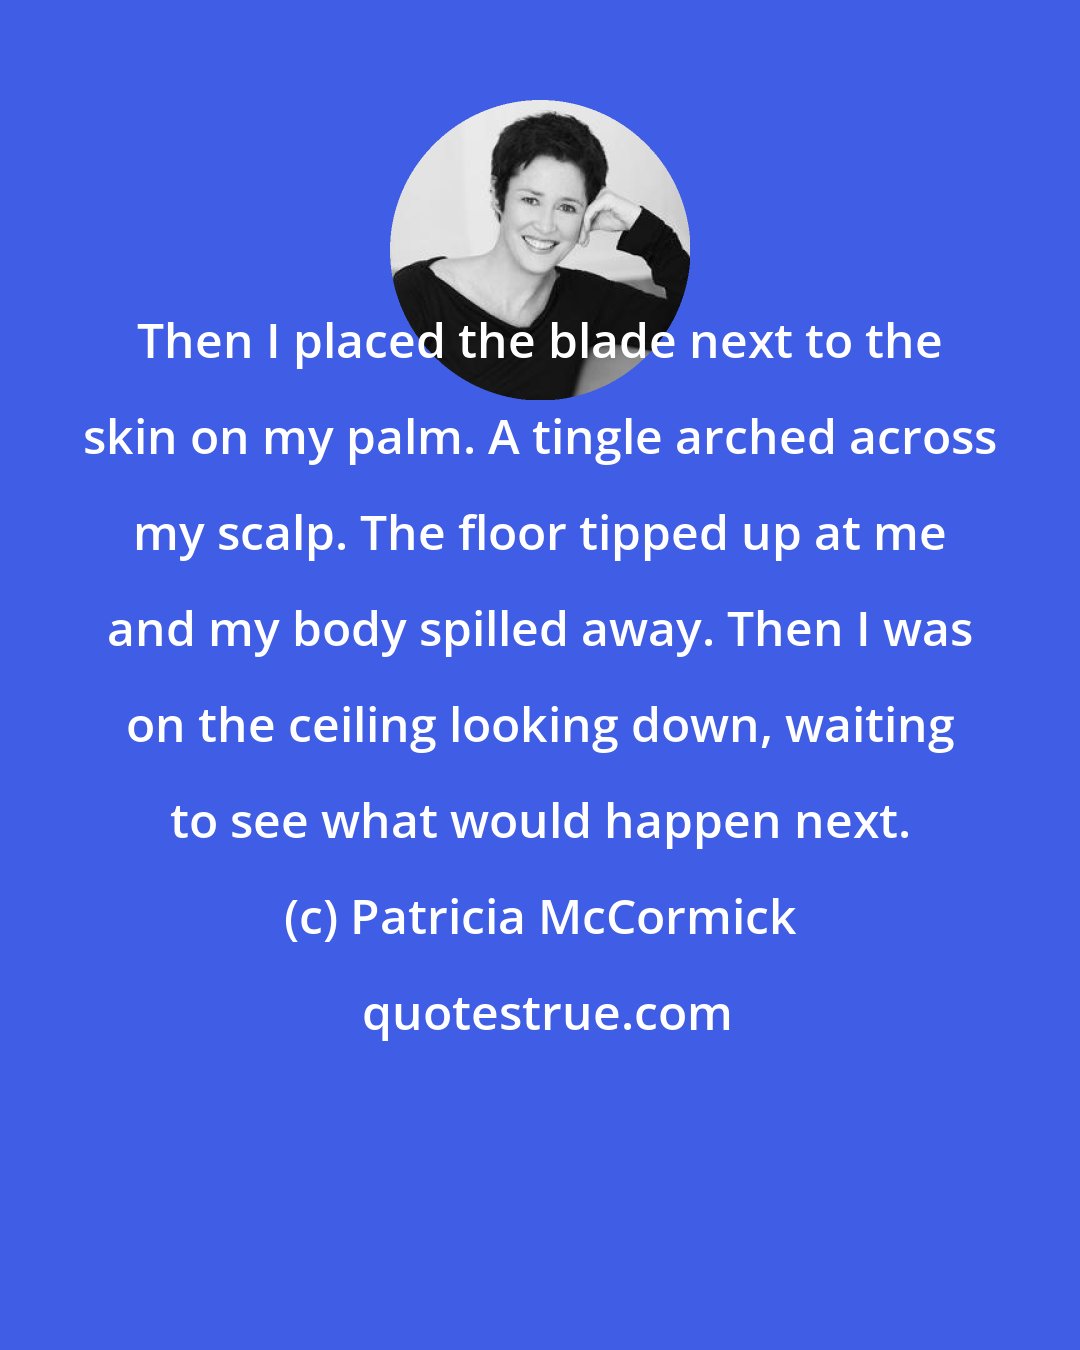 Patricia McCormick: Then I placed the blade next to the skin on my palm. A tingle arched across my scalp. The floor tipped up at me and my body spilled away. Then I was on the ceiling looking down, waiting to see what would happen next.